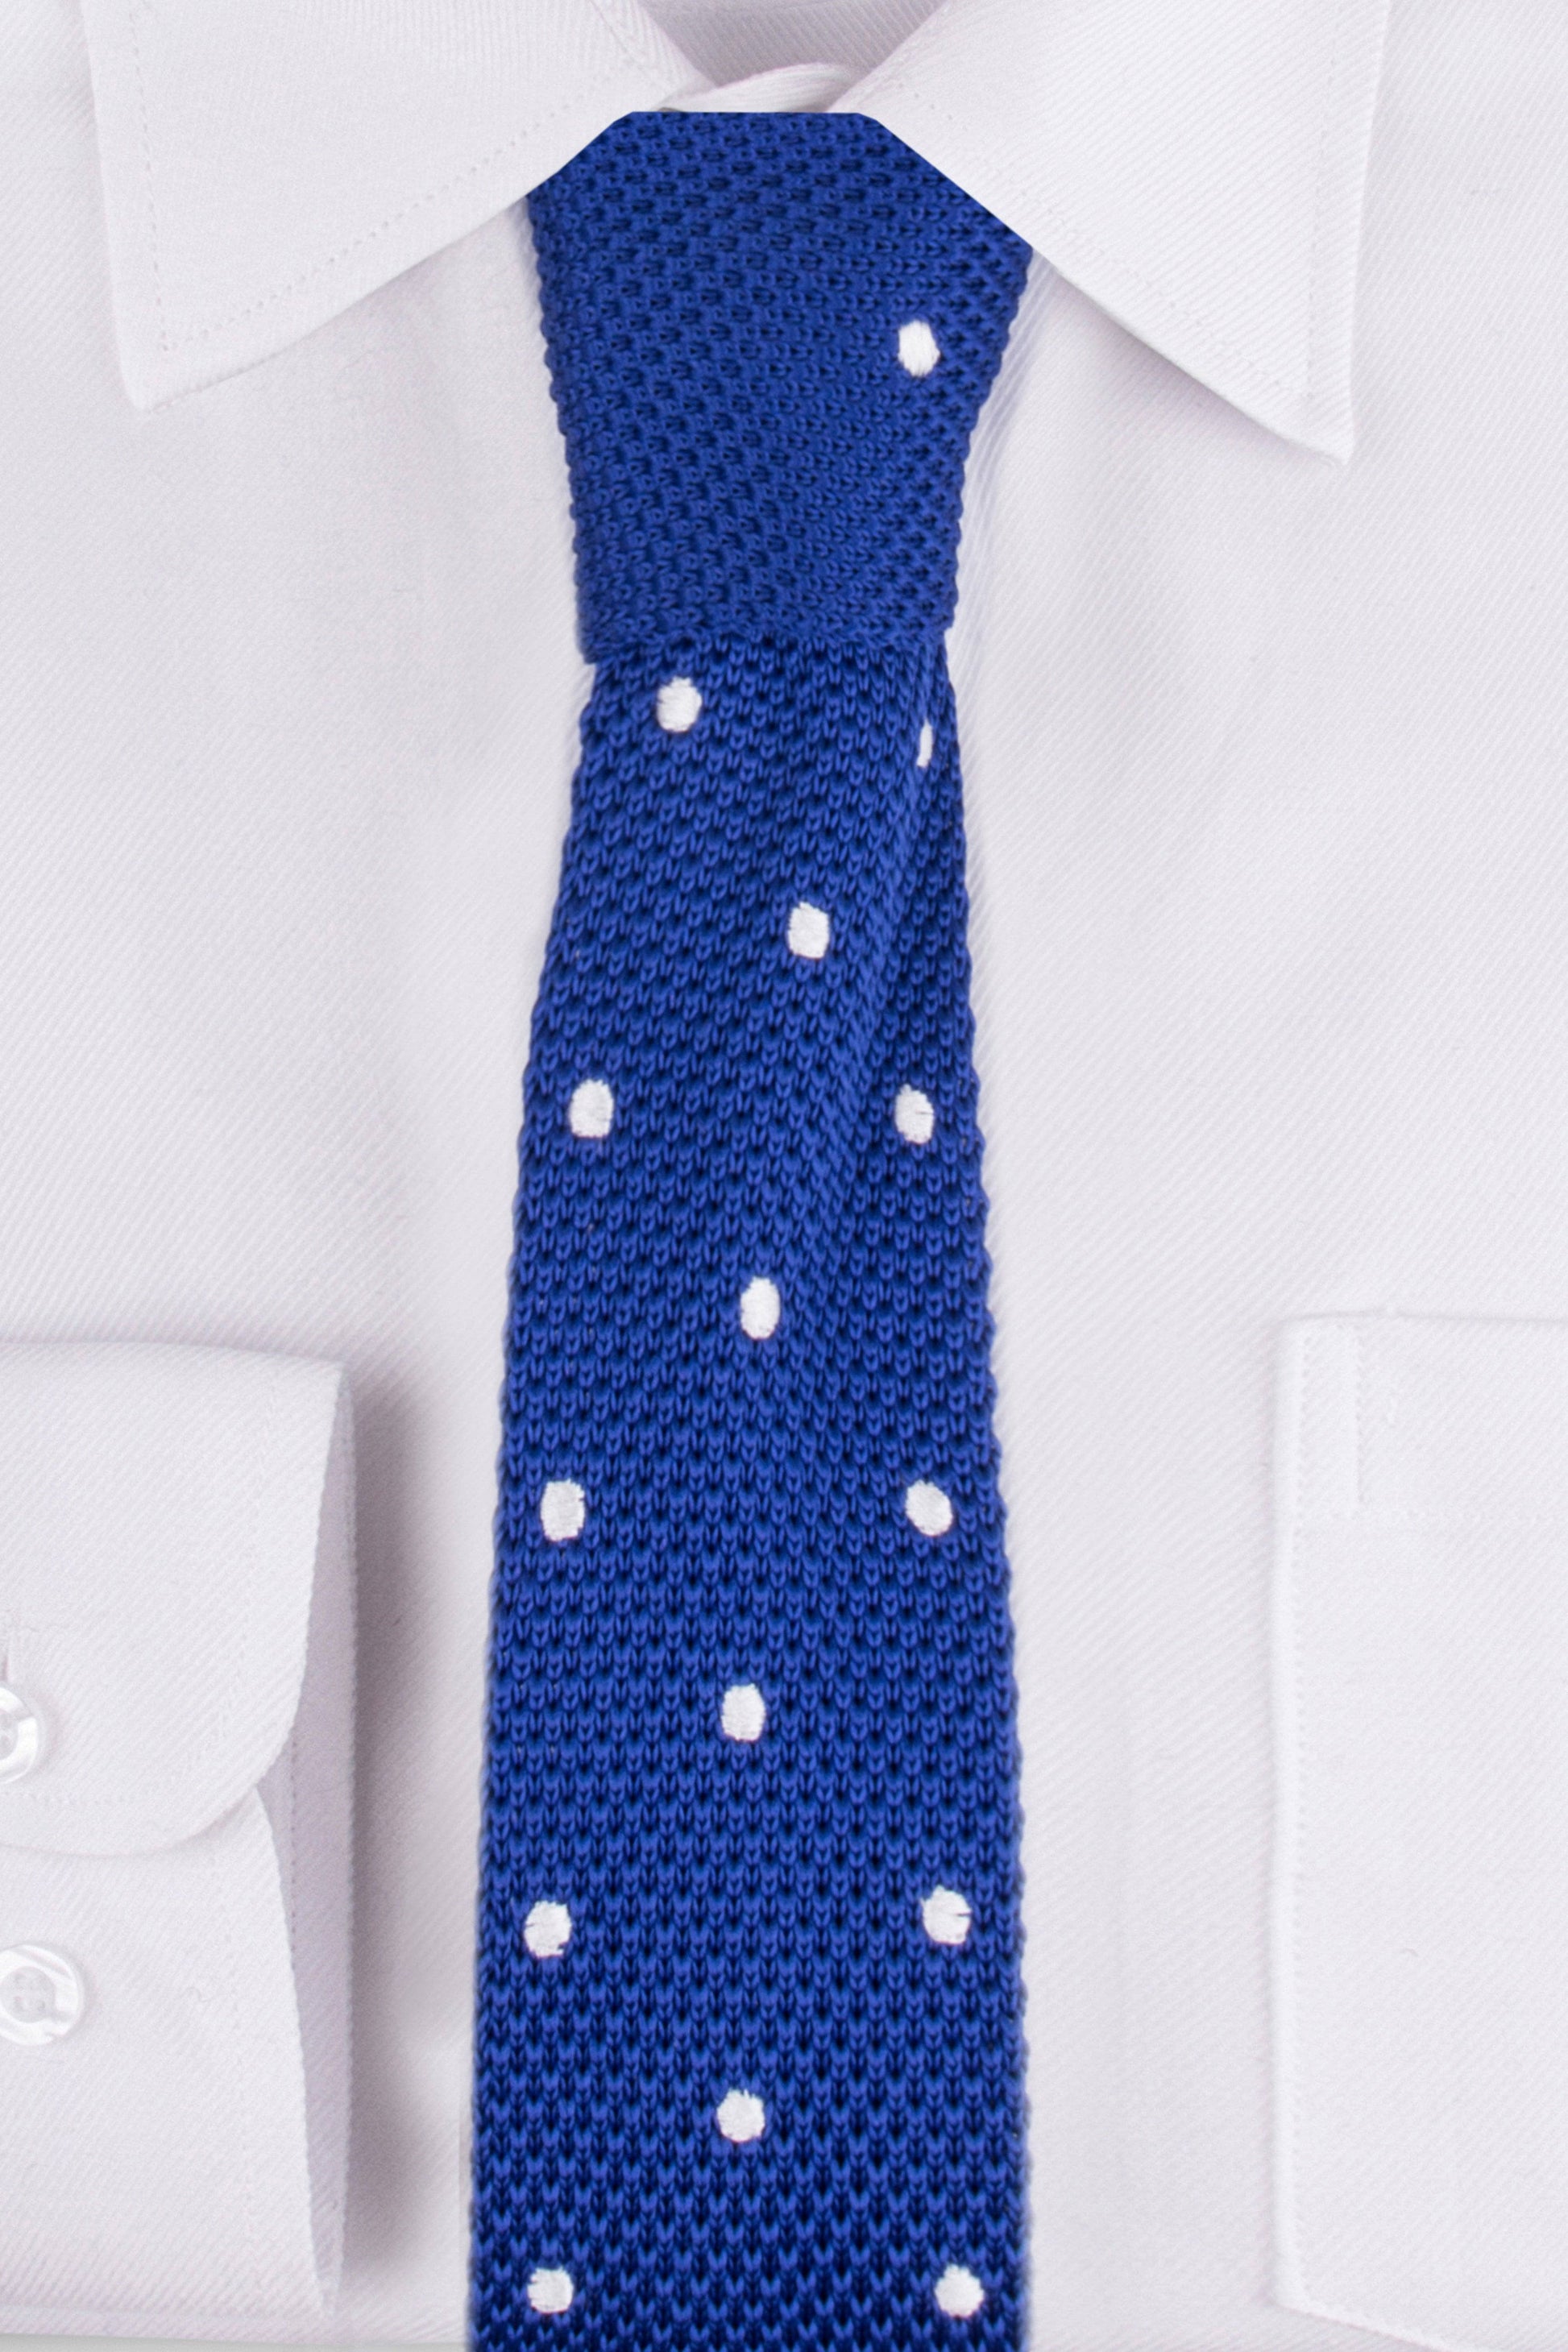 Close up of Royal Blue White Spot Knitted Tie on a white shirt